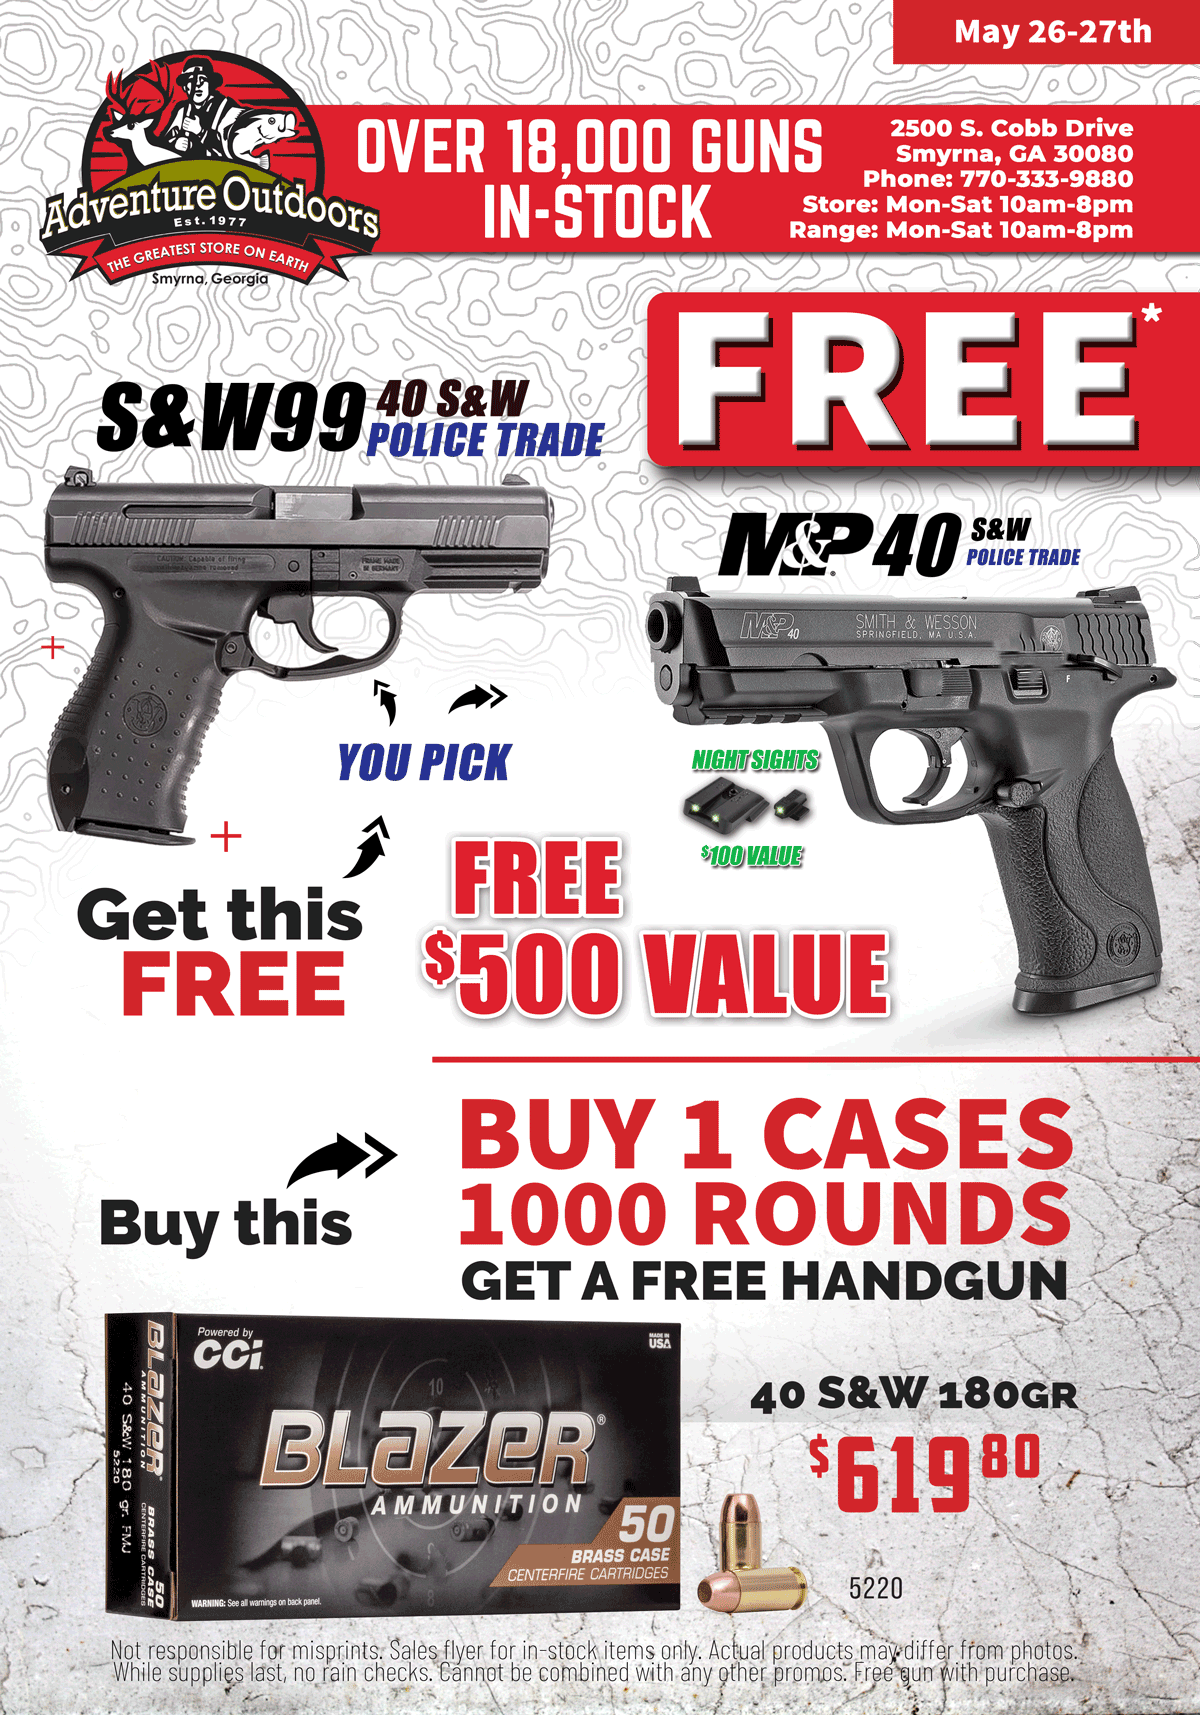 FREE S&W Police Trade